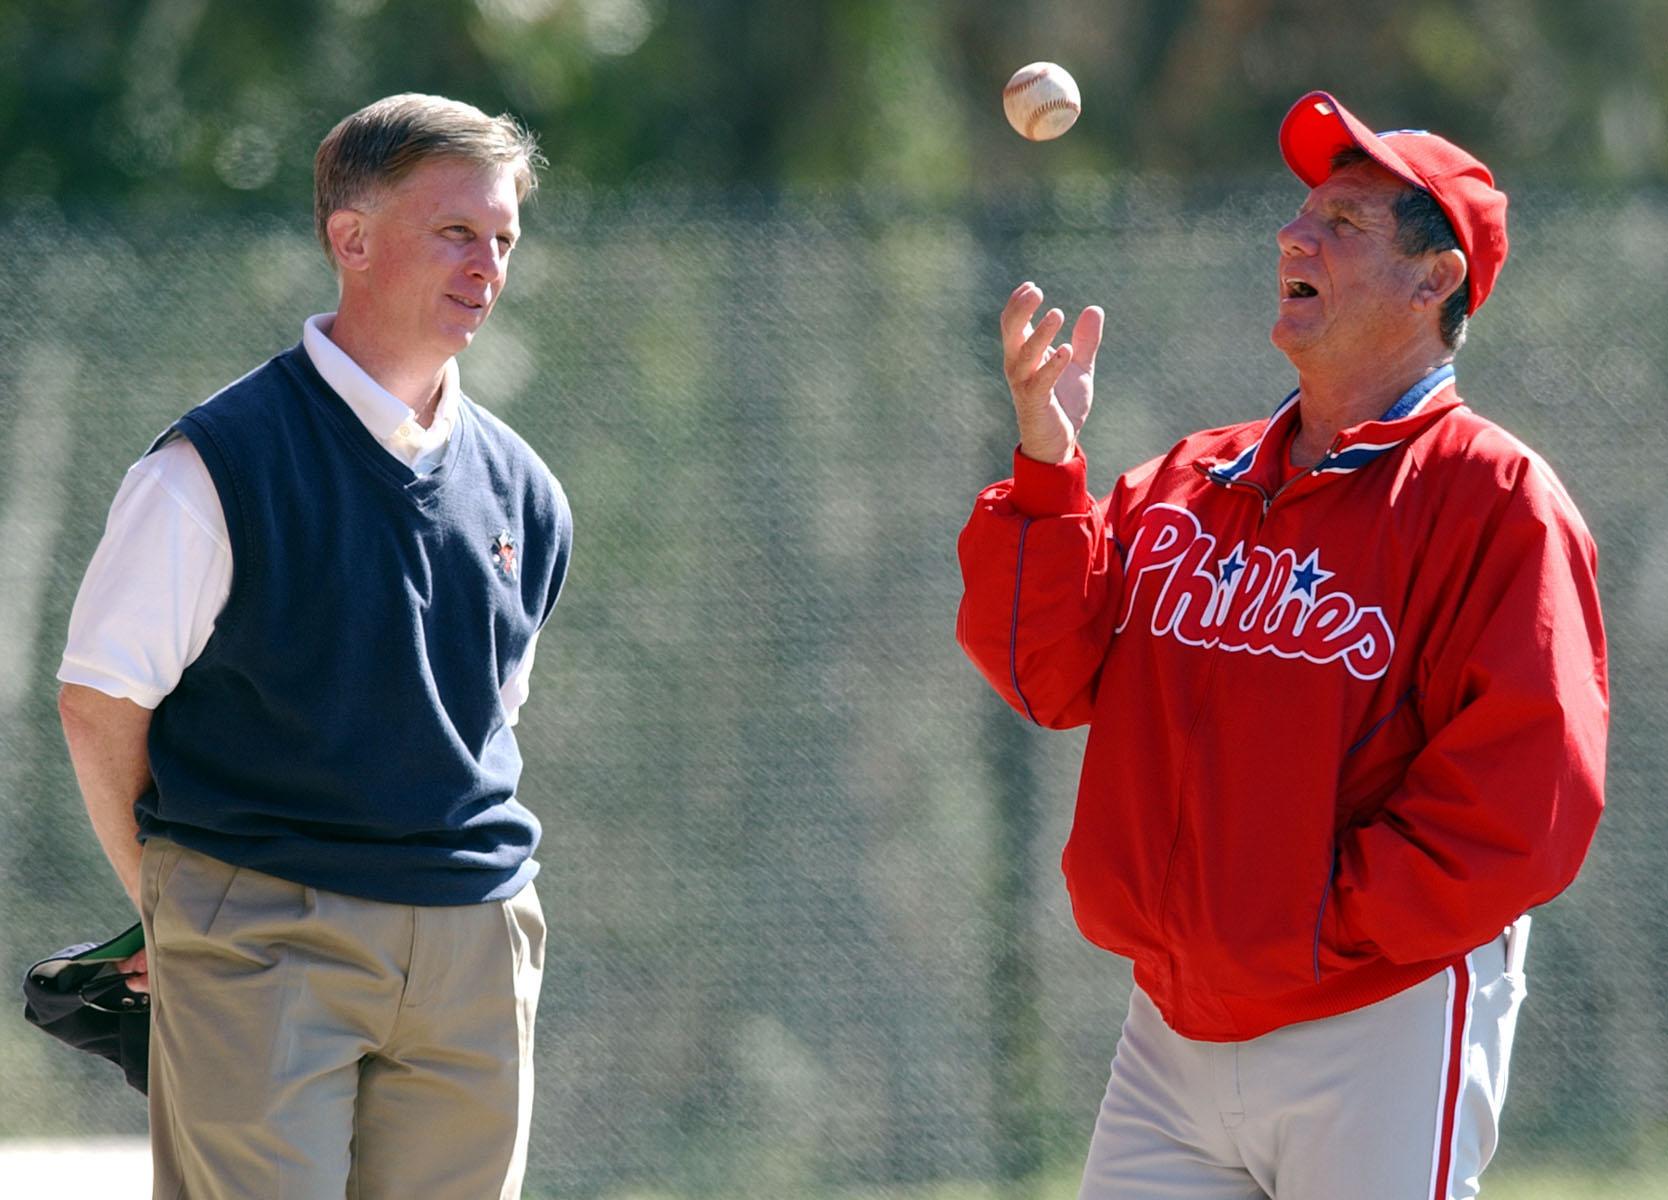 Hall of Fame or Not, Chase Utley Was 'The Man' for Philadelphia